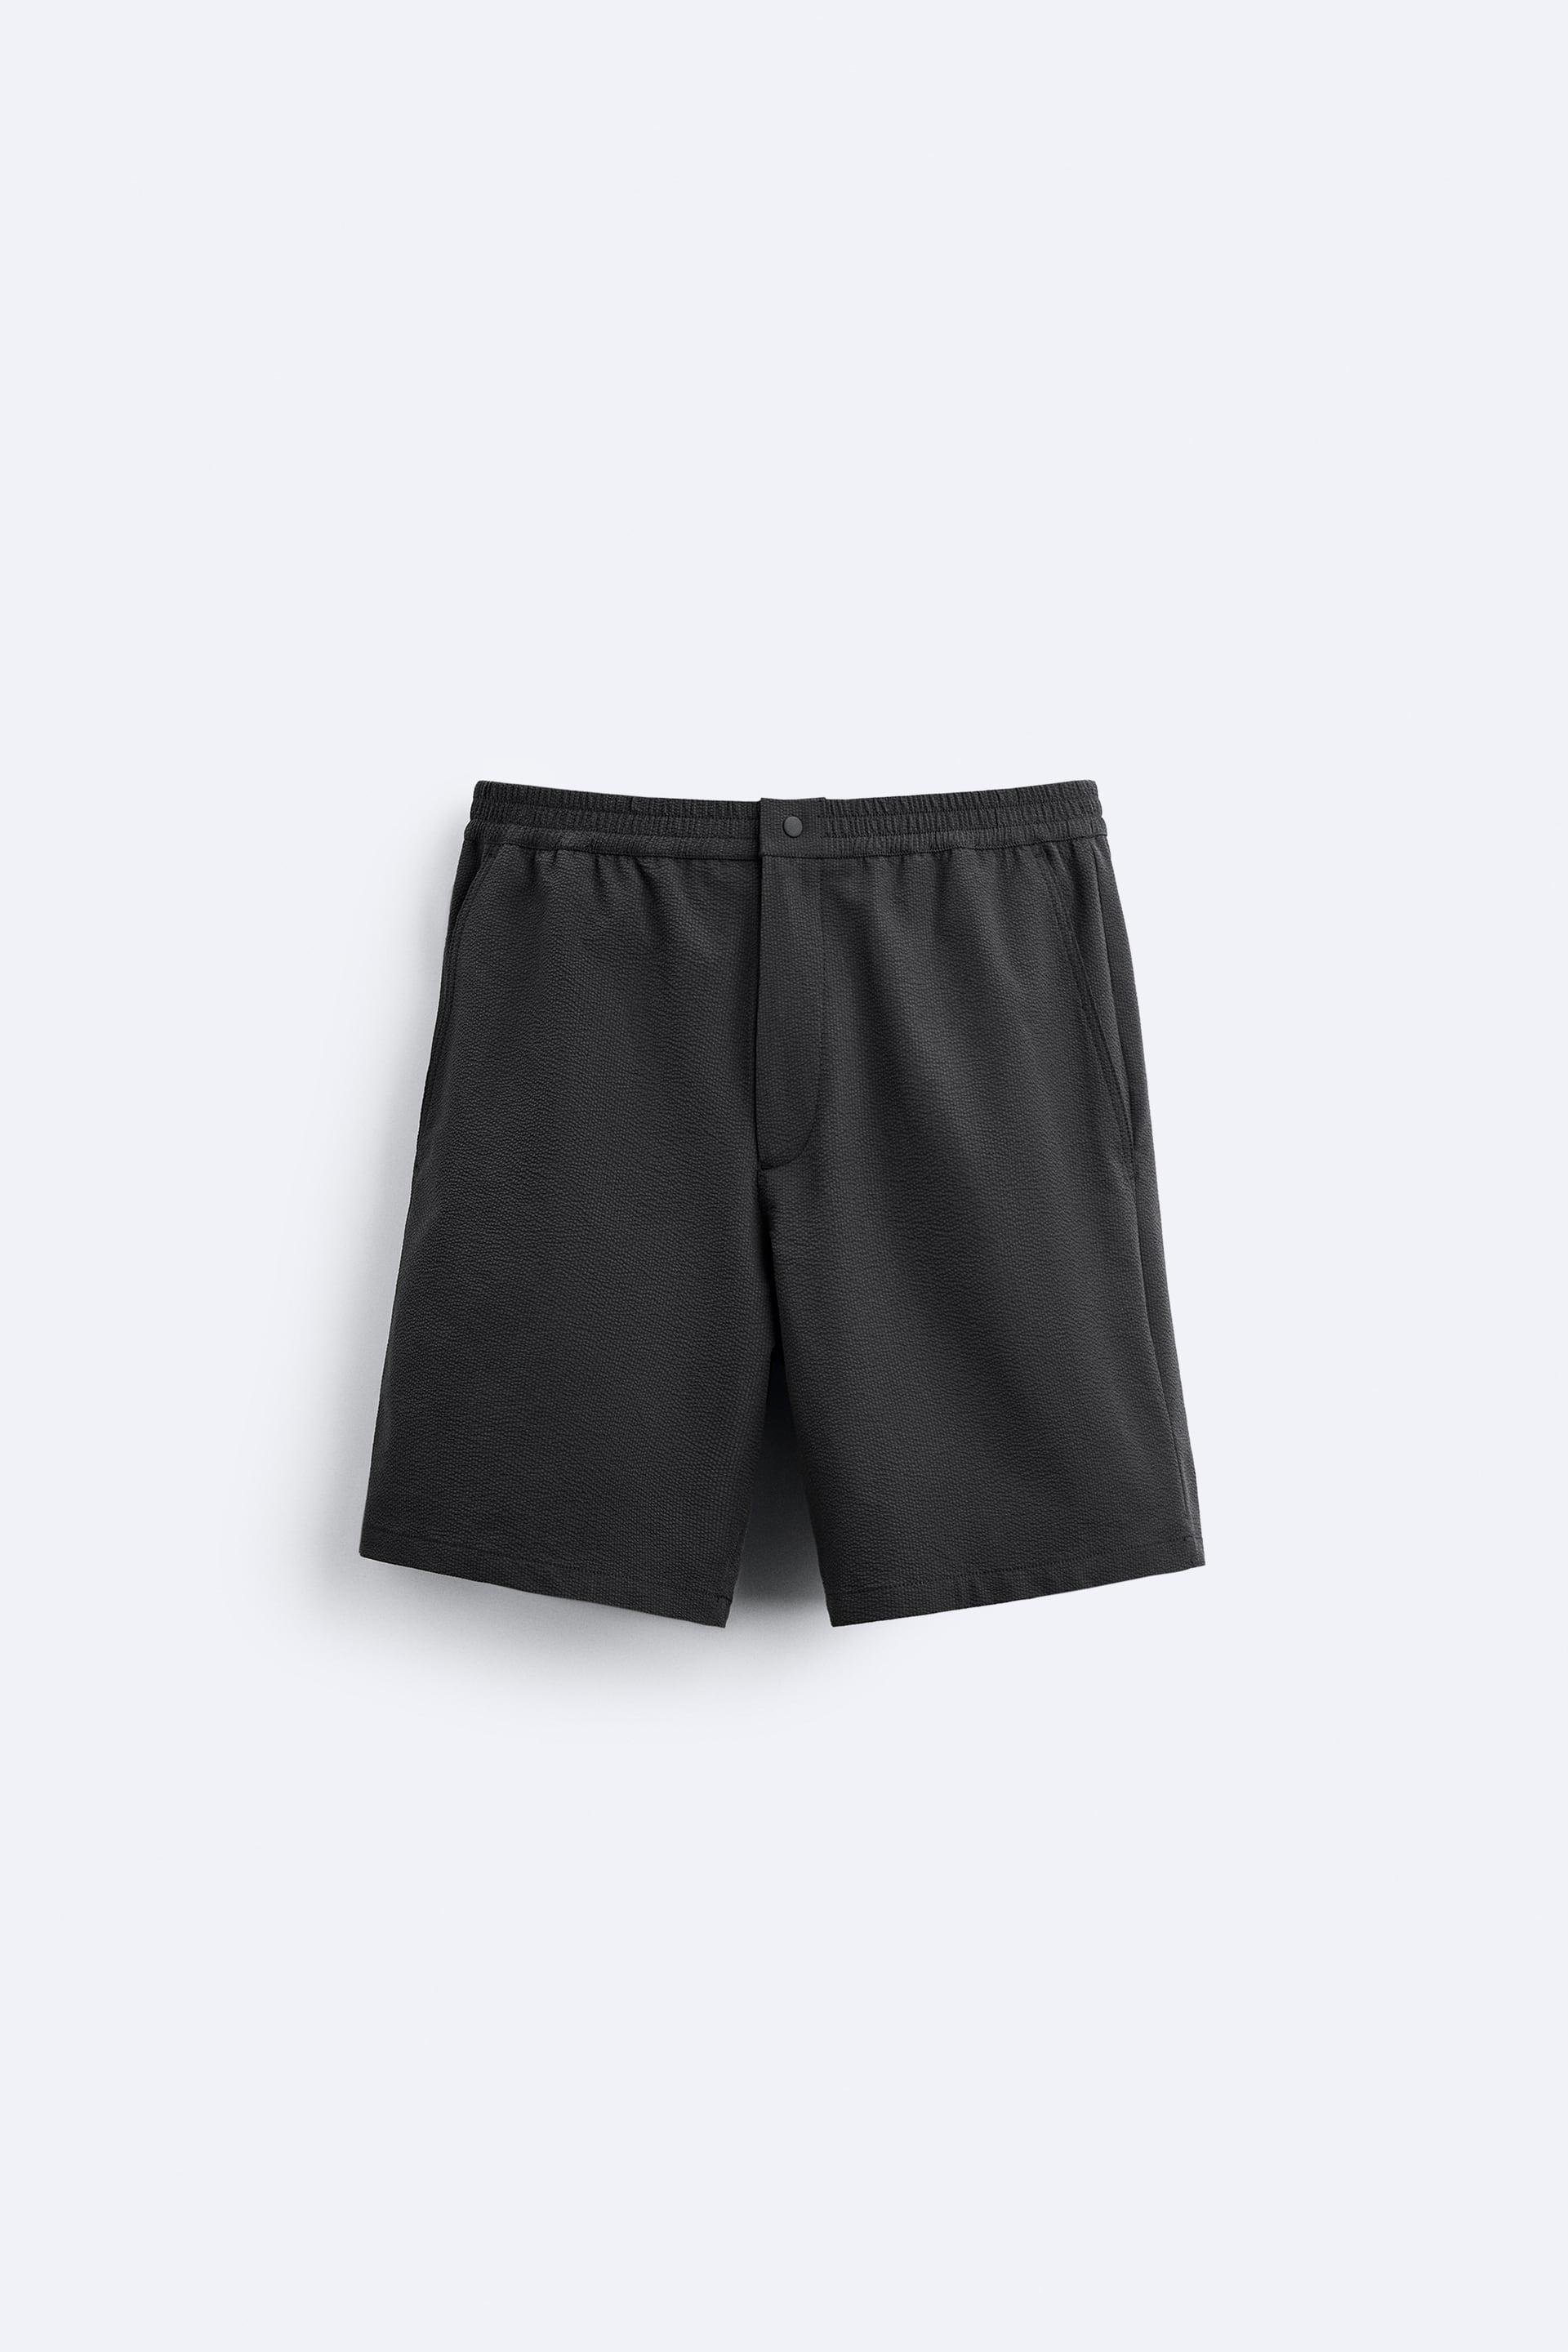 LONG STRUCTURED SWIMMING TRUNKS by ZARA